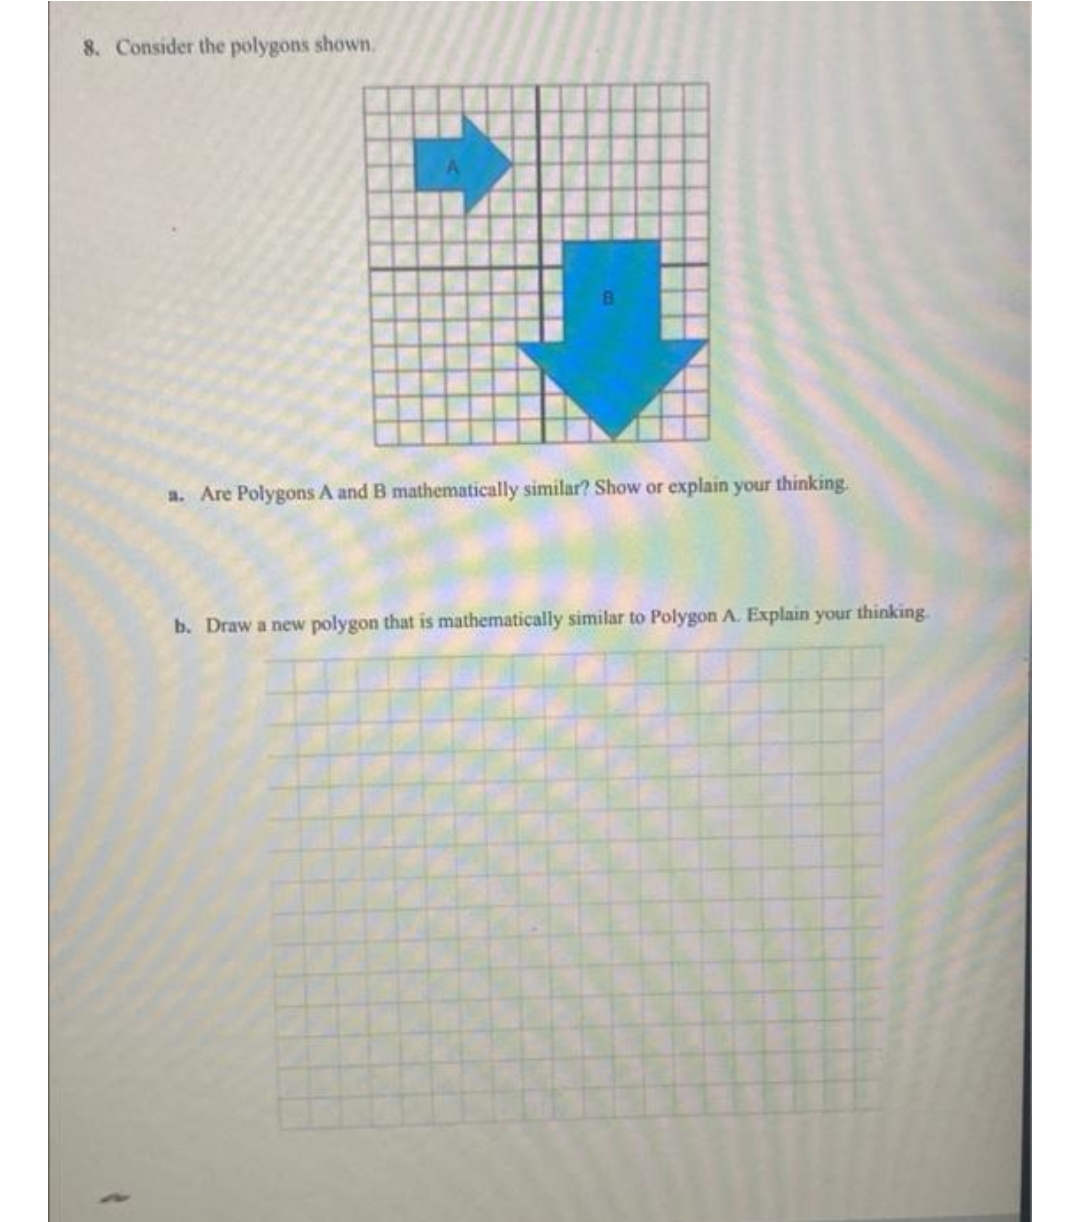 8. Consider the polygons shown,
a. Are Polygons A and B mathematically similar? Show or explain your thinking.
b. Draw a new polygon that is mathematically similar to Polygon A. Explain your thinking
